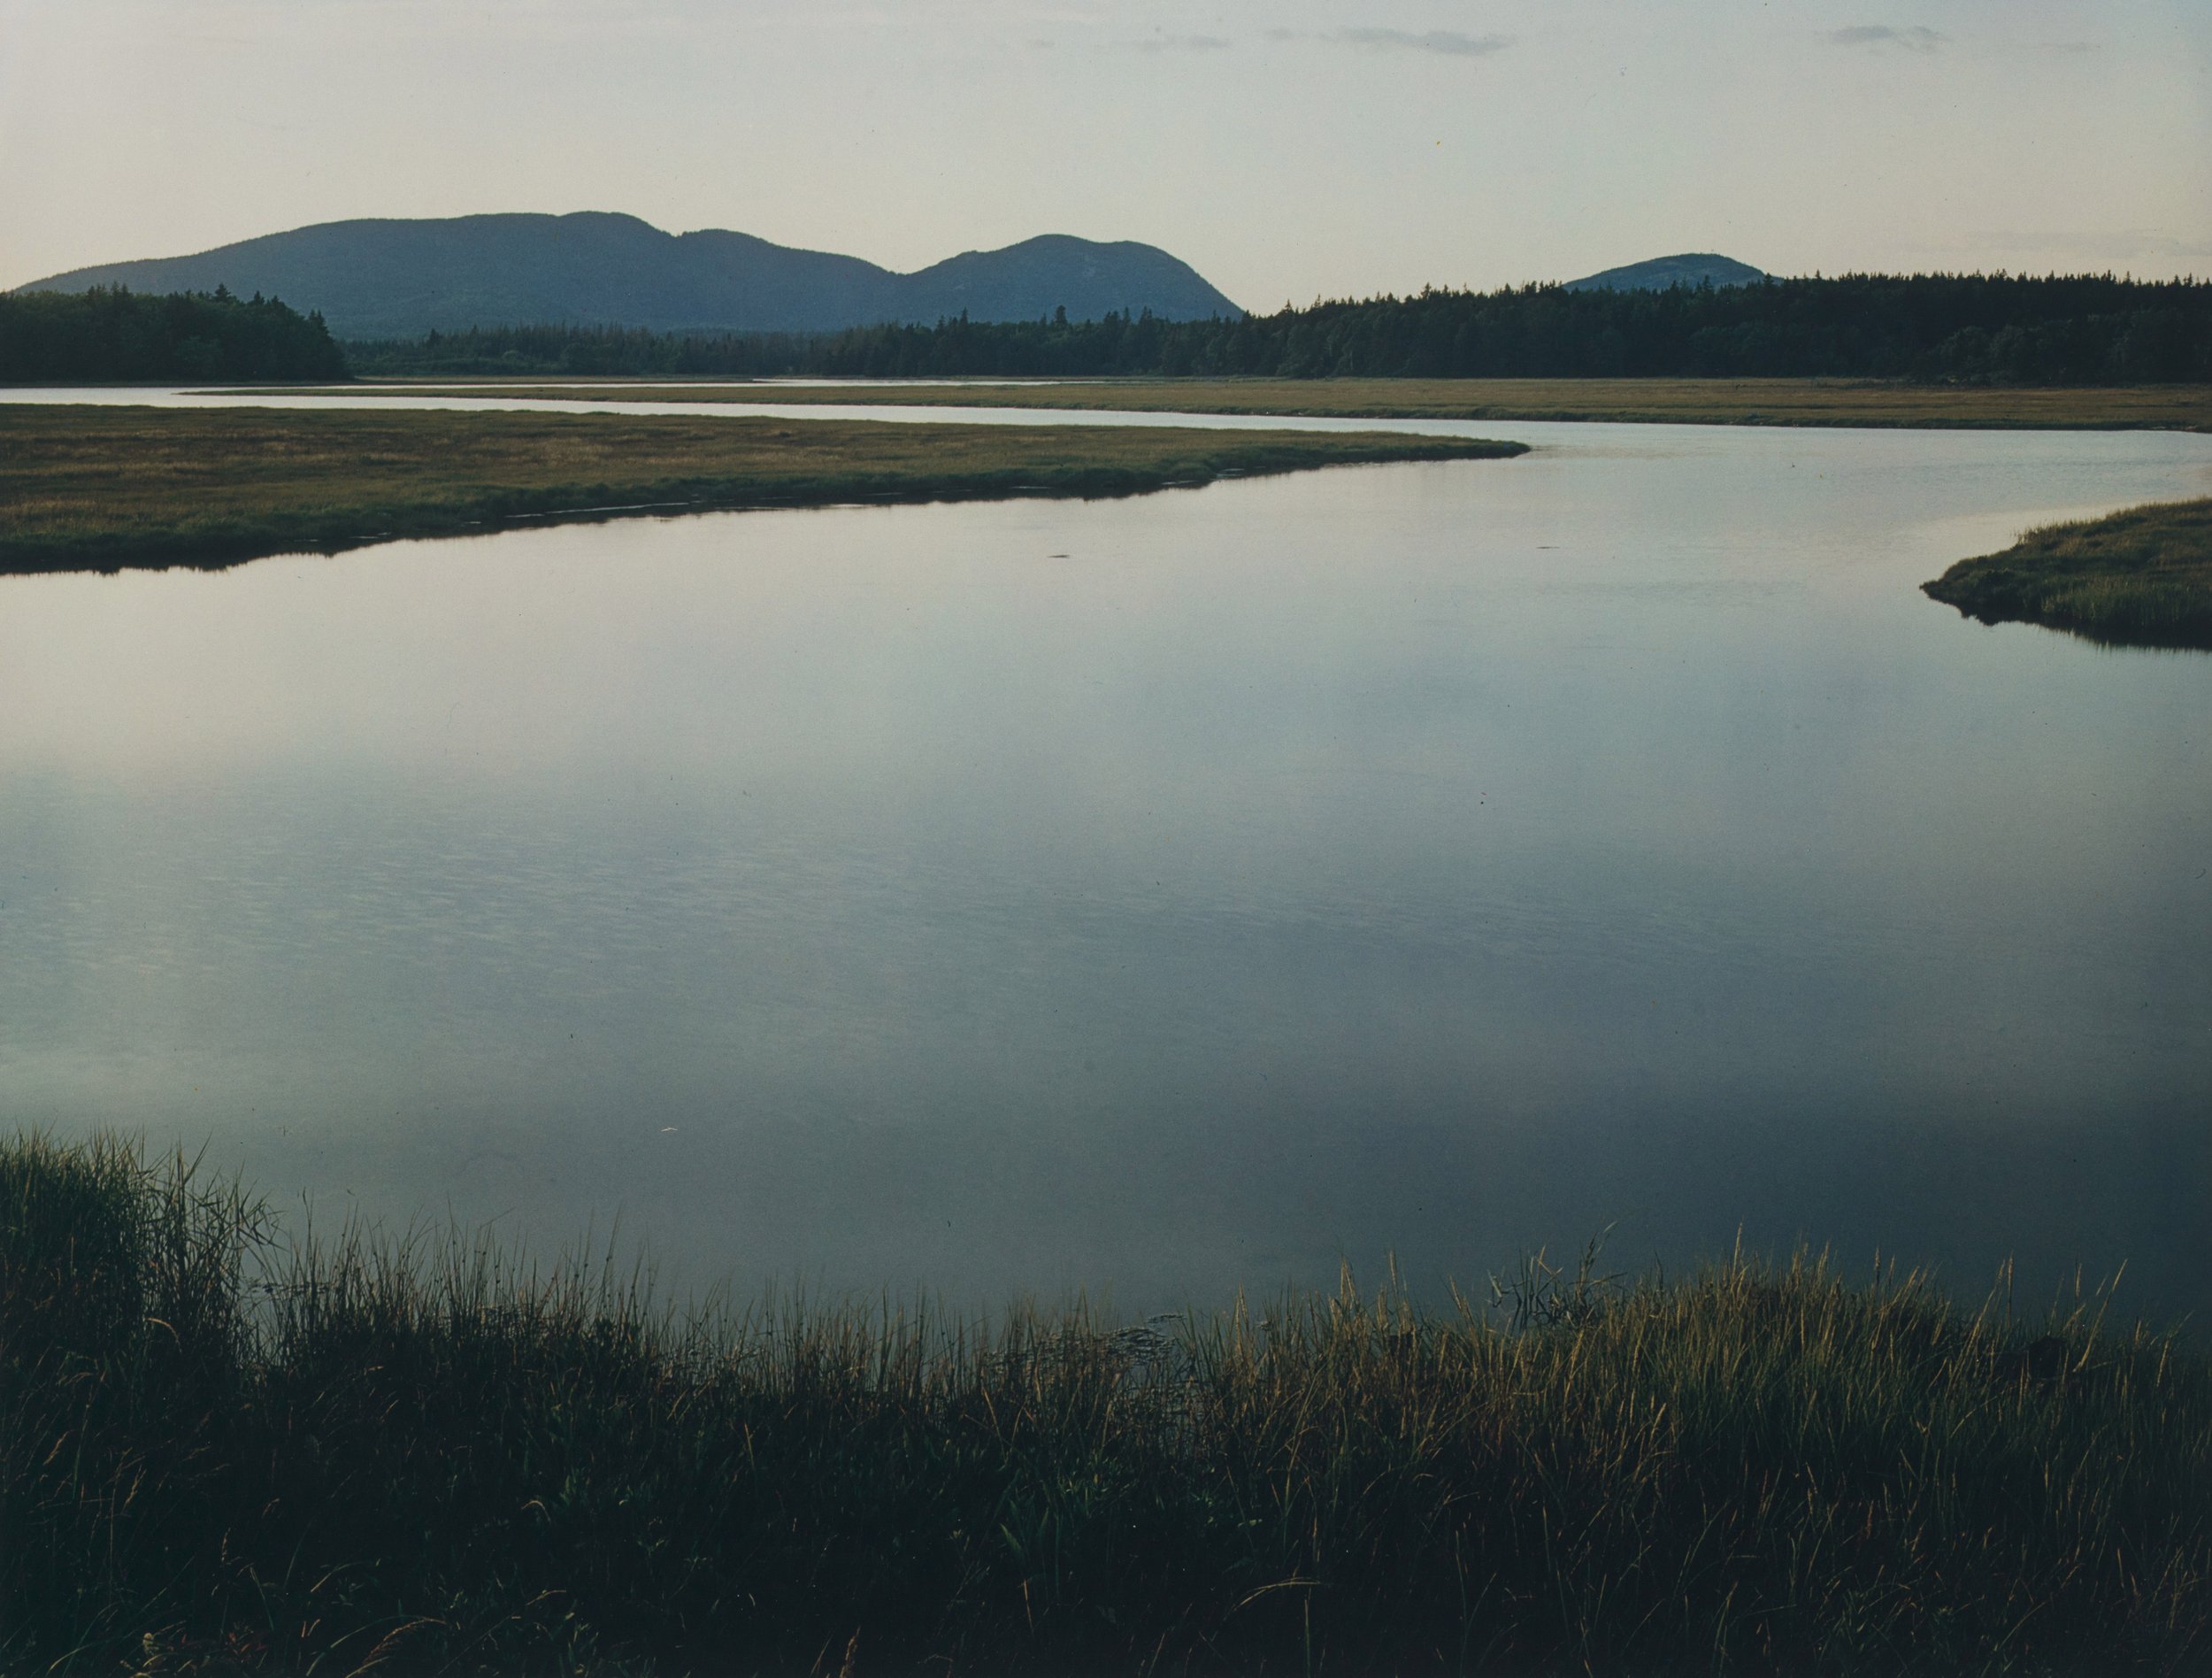   Eliot Porter  United States, 1901–1990  Tidal Marsh, Mount Desert Island, Maine, August 4, 1965 , from the portfolio  In Wildness , 1981 dye transfer print, 16 x 12 1/8 inches Gift of Owen W. and Anna H. Wells, 2014.15.4 © 1981 by Daniel Wolf Press